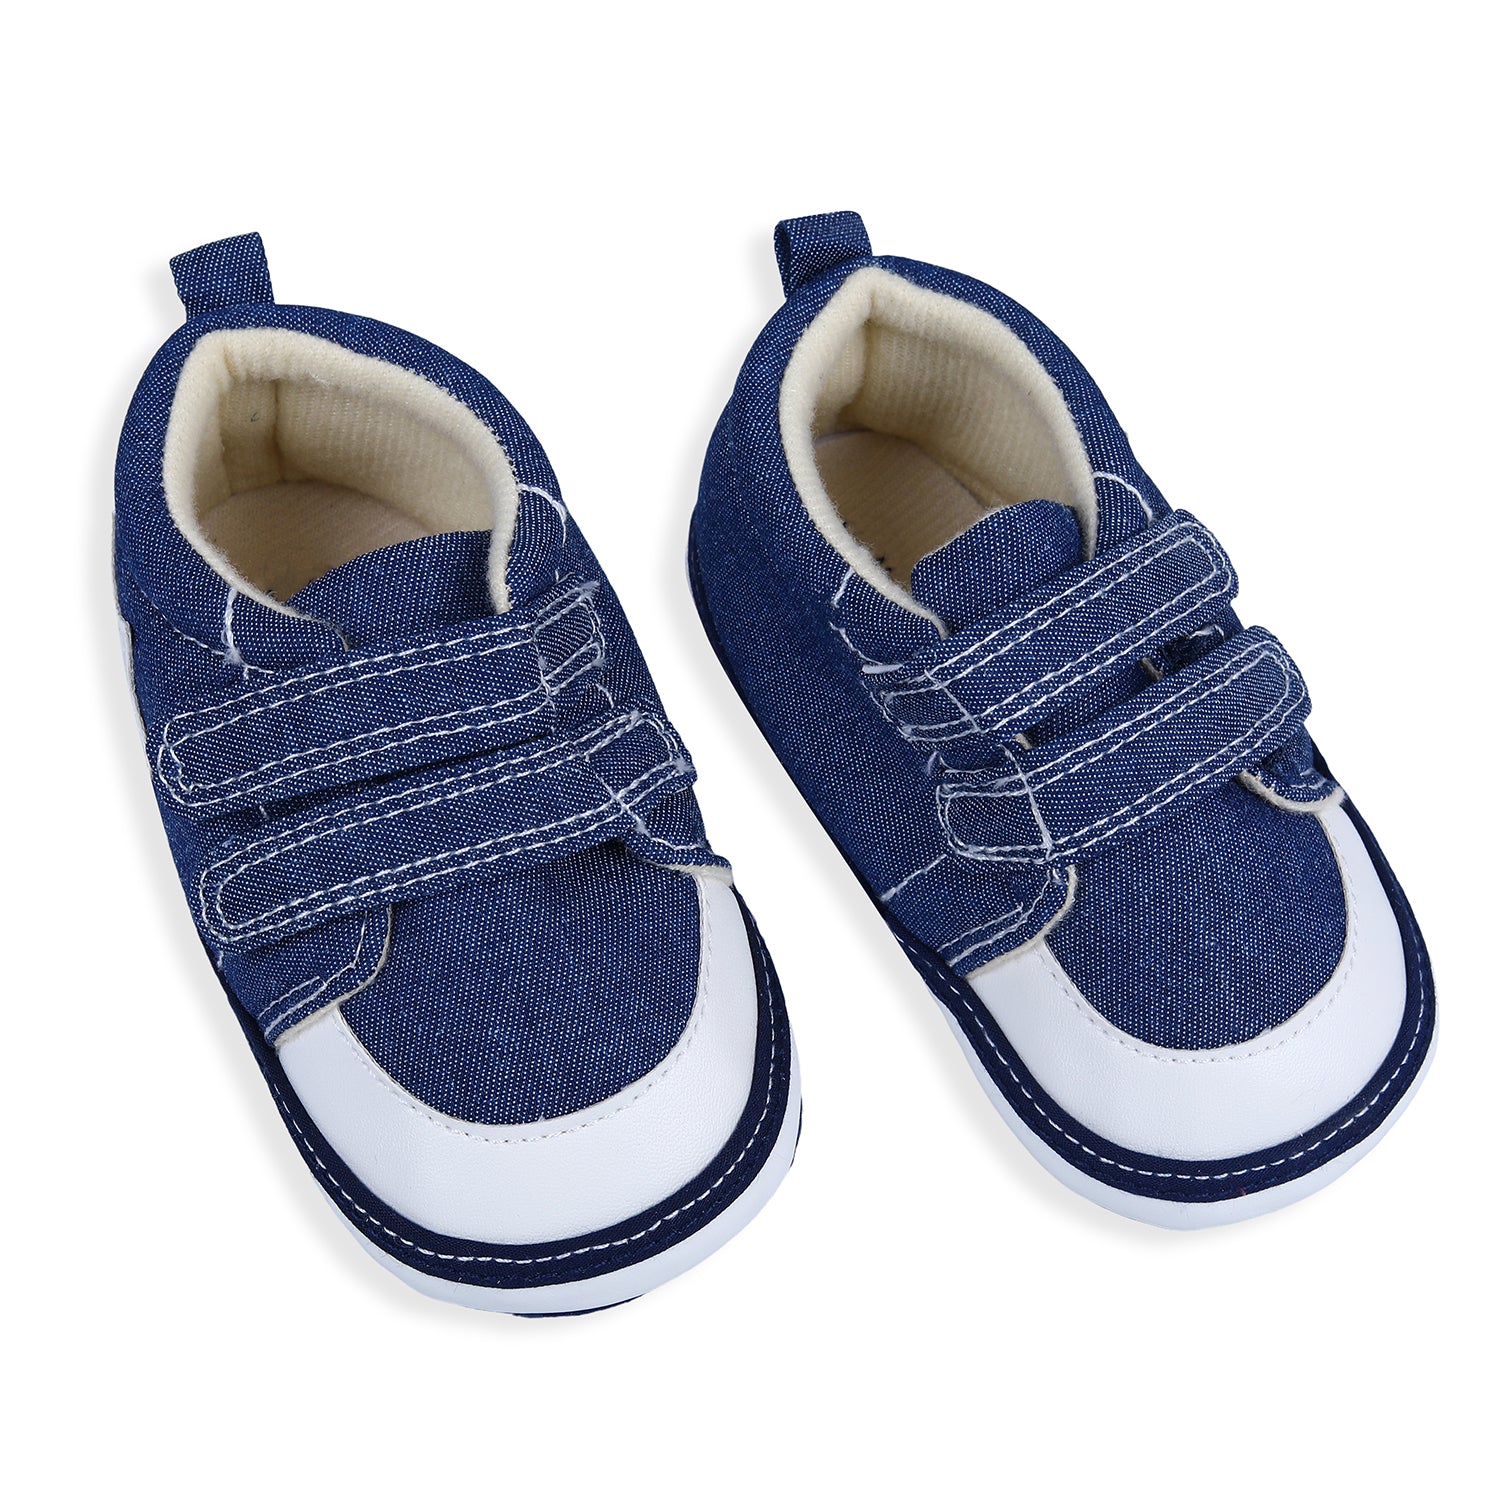 Colour Blocked Hookloop Stylish And Casual Denim Velcro Booties - Blue - Baby Moo